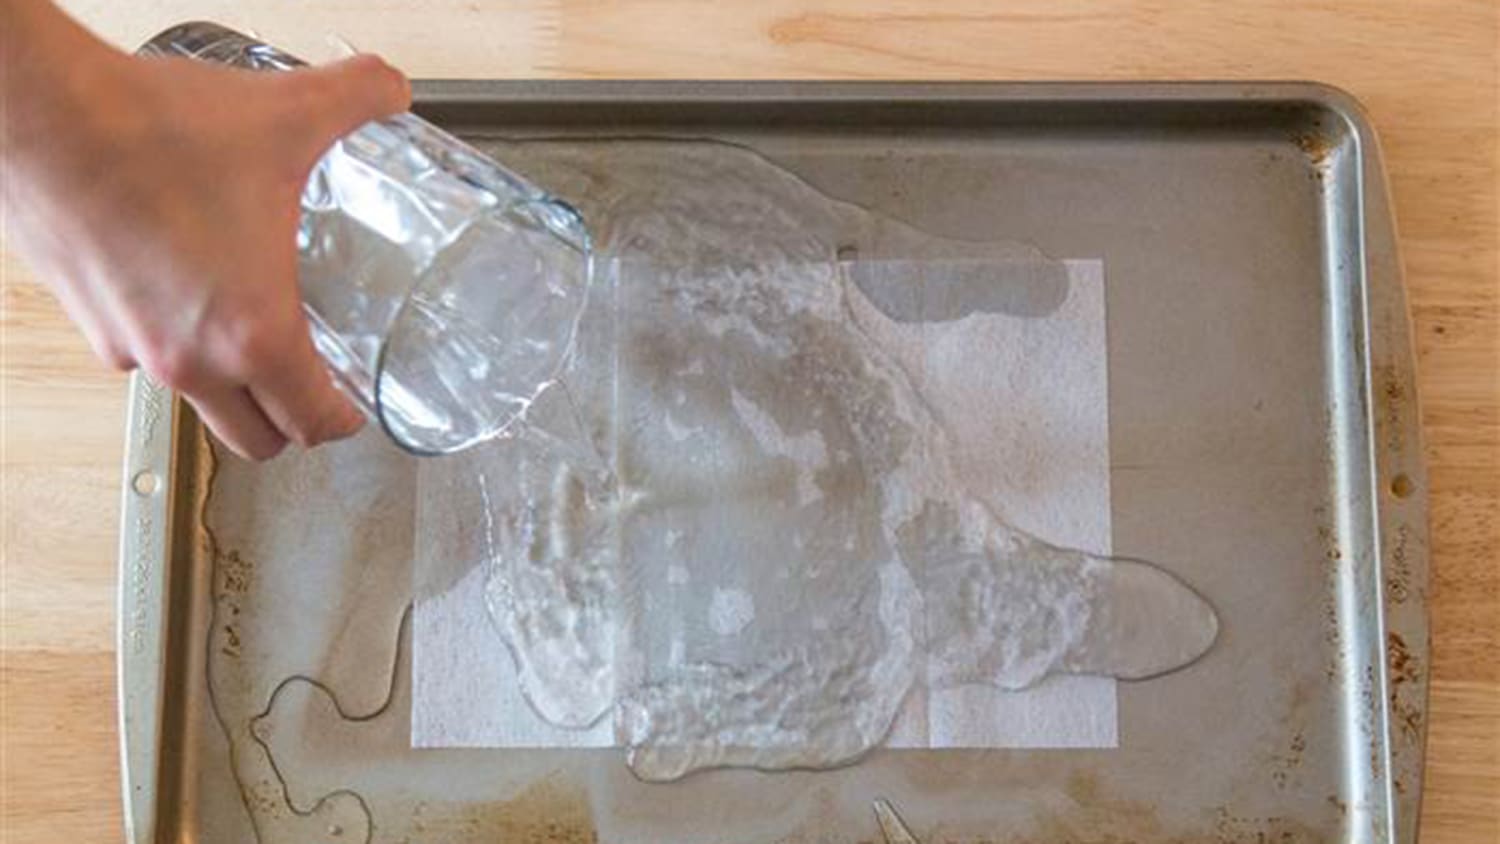 How to clean pots and glass baking pans with dryer sheets